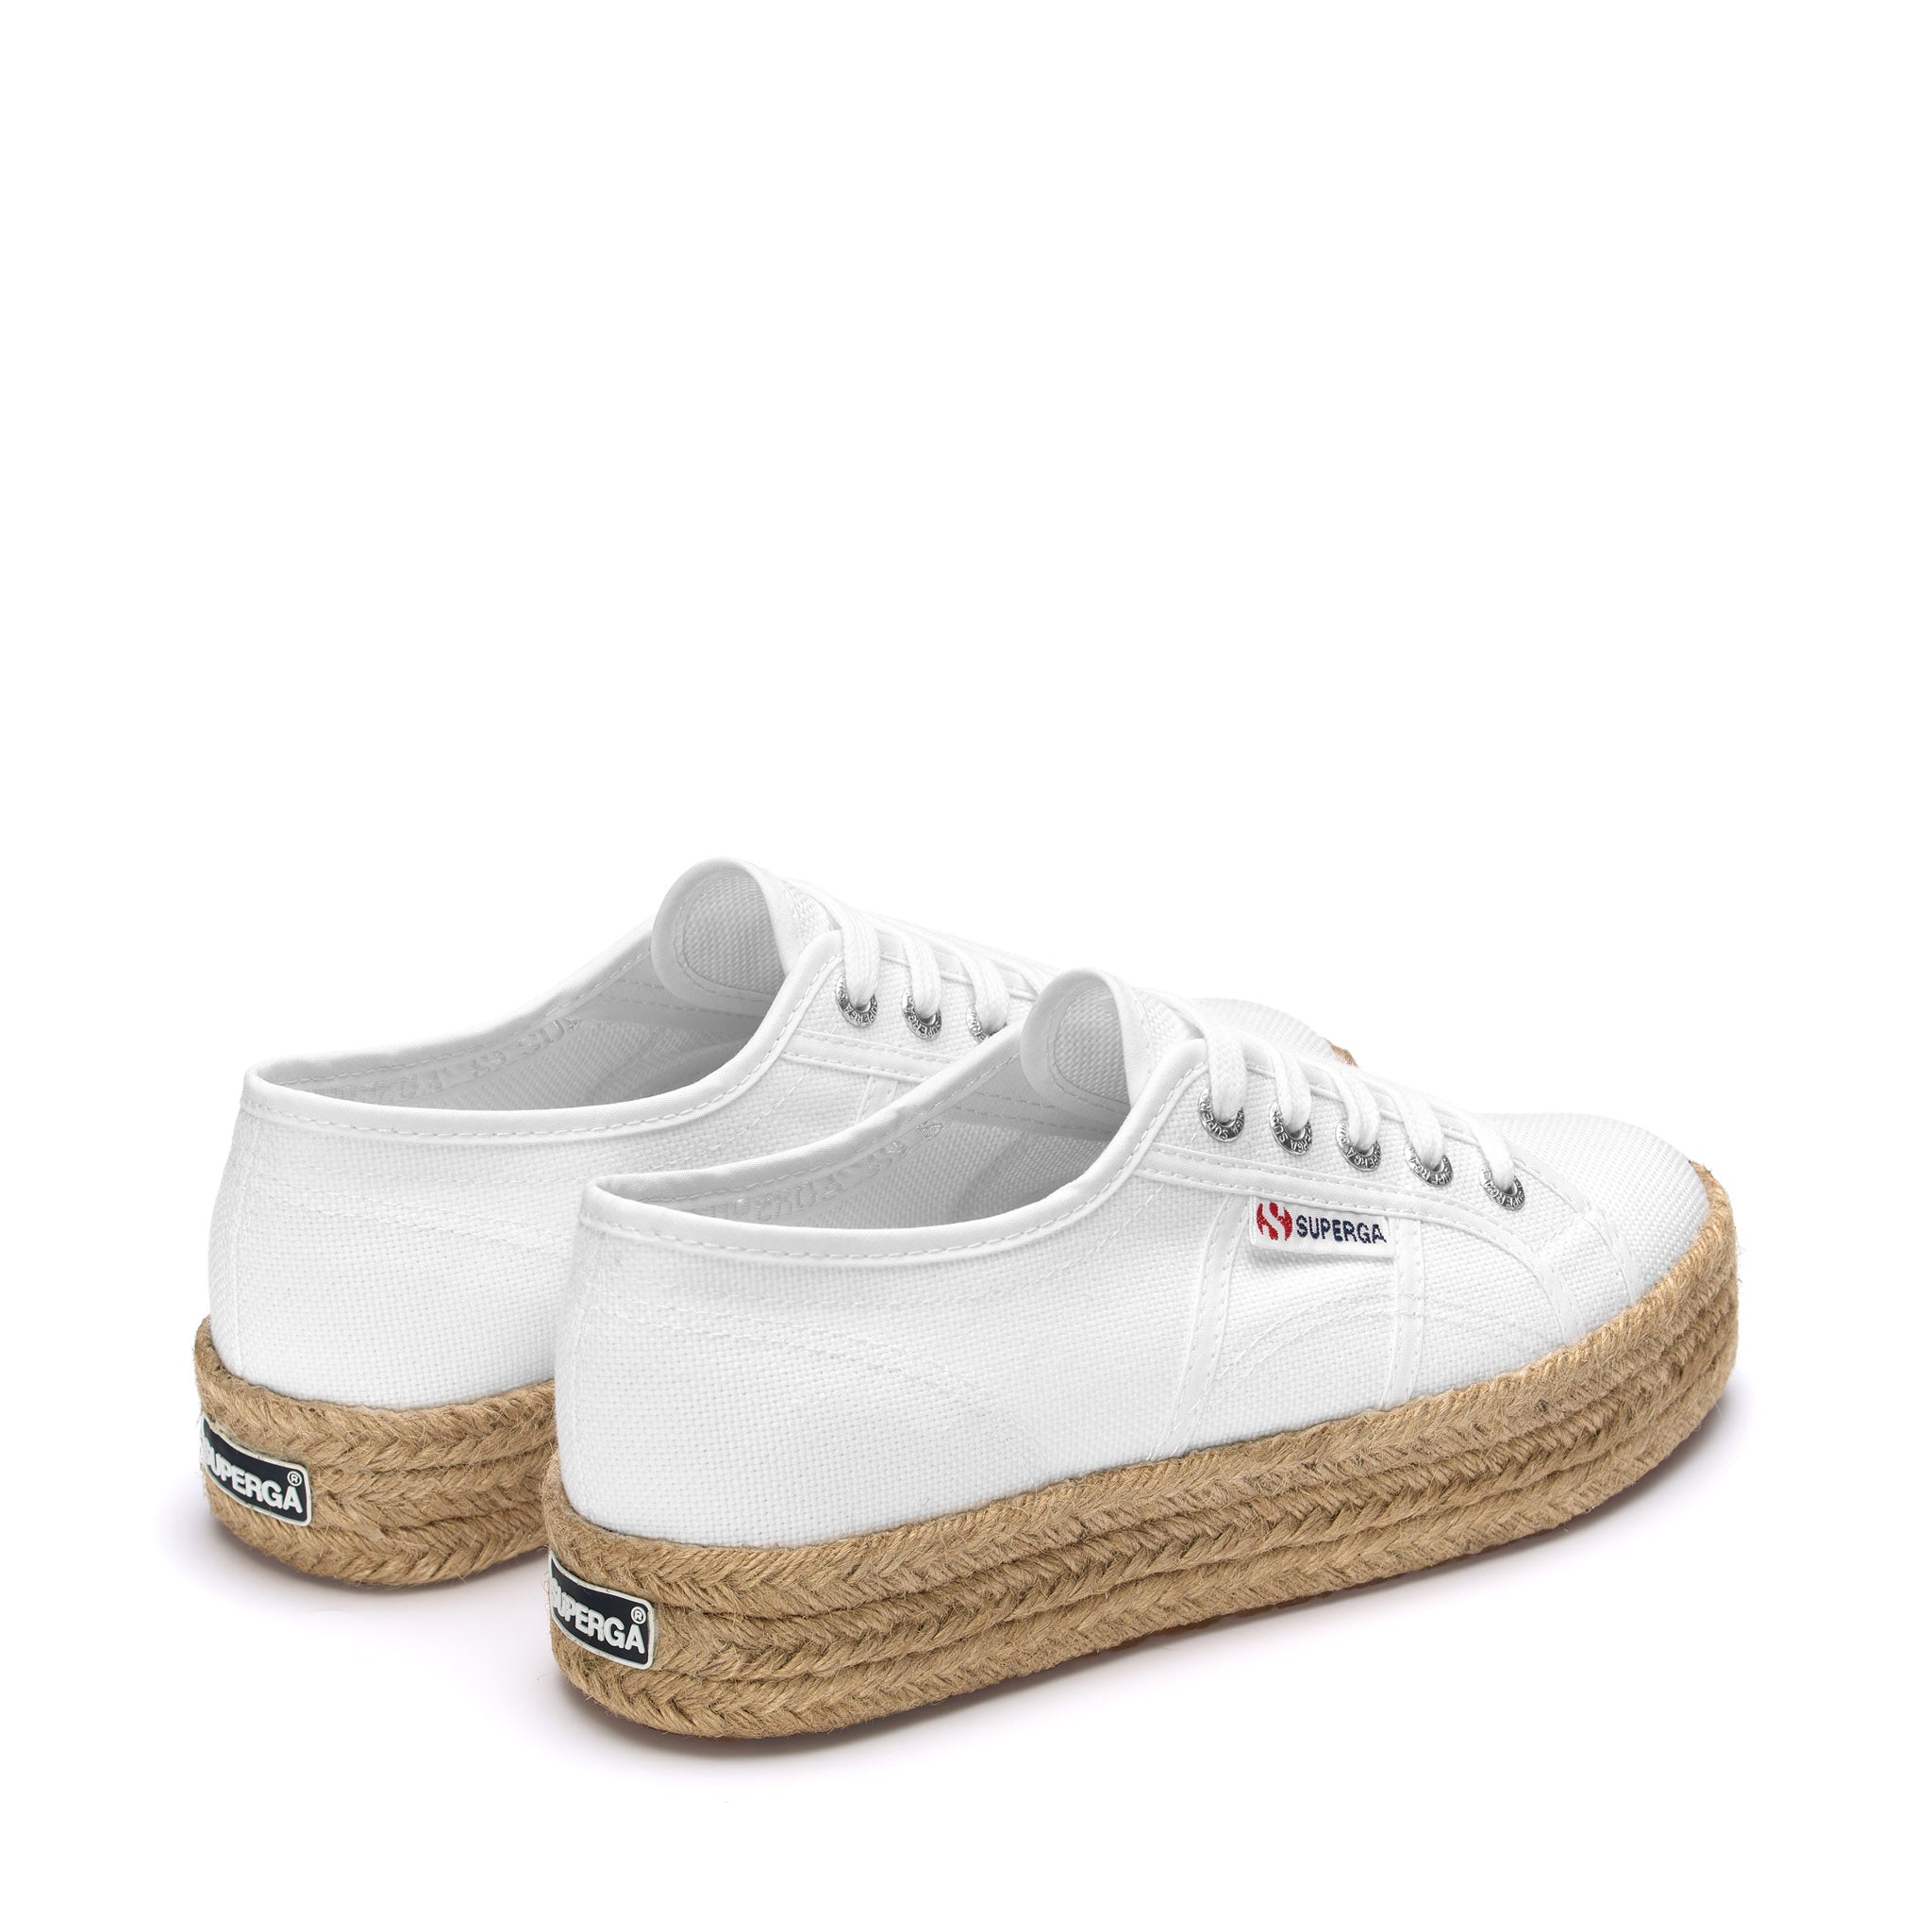 Superga 2730 Rope Sneakers - White. Back view.